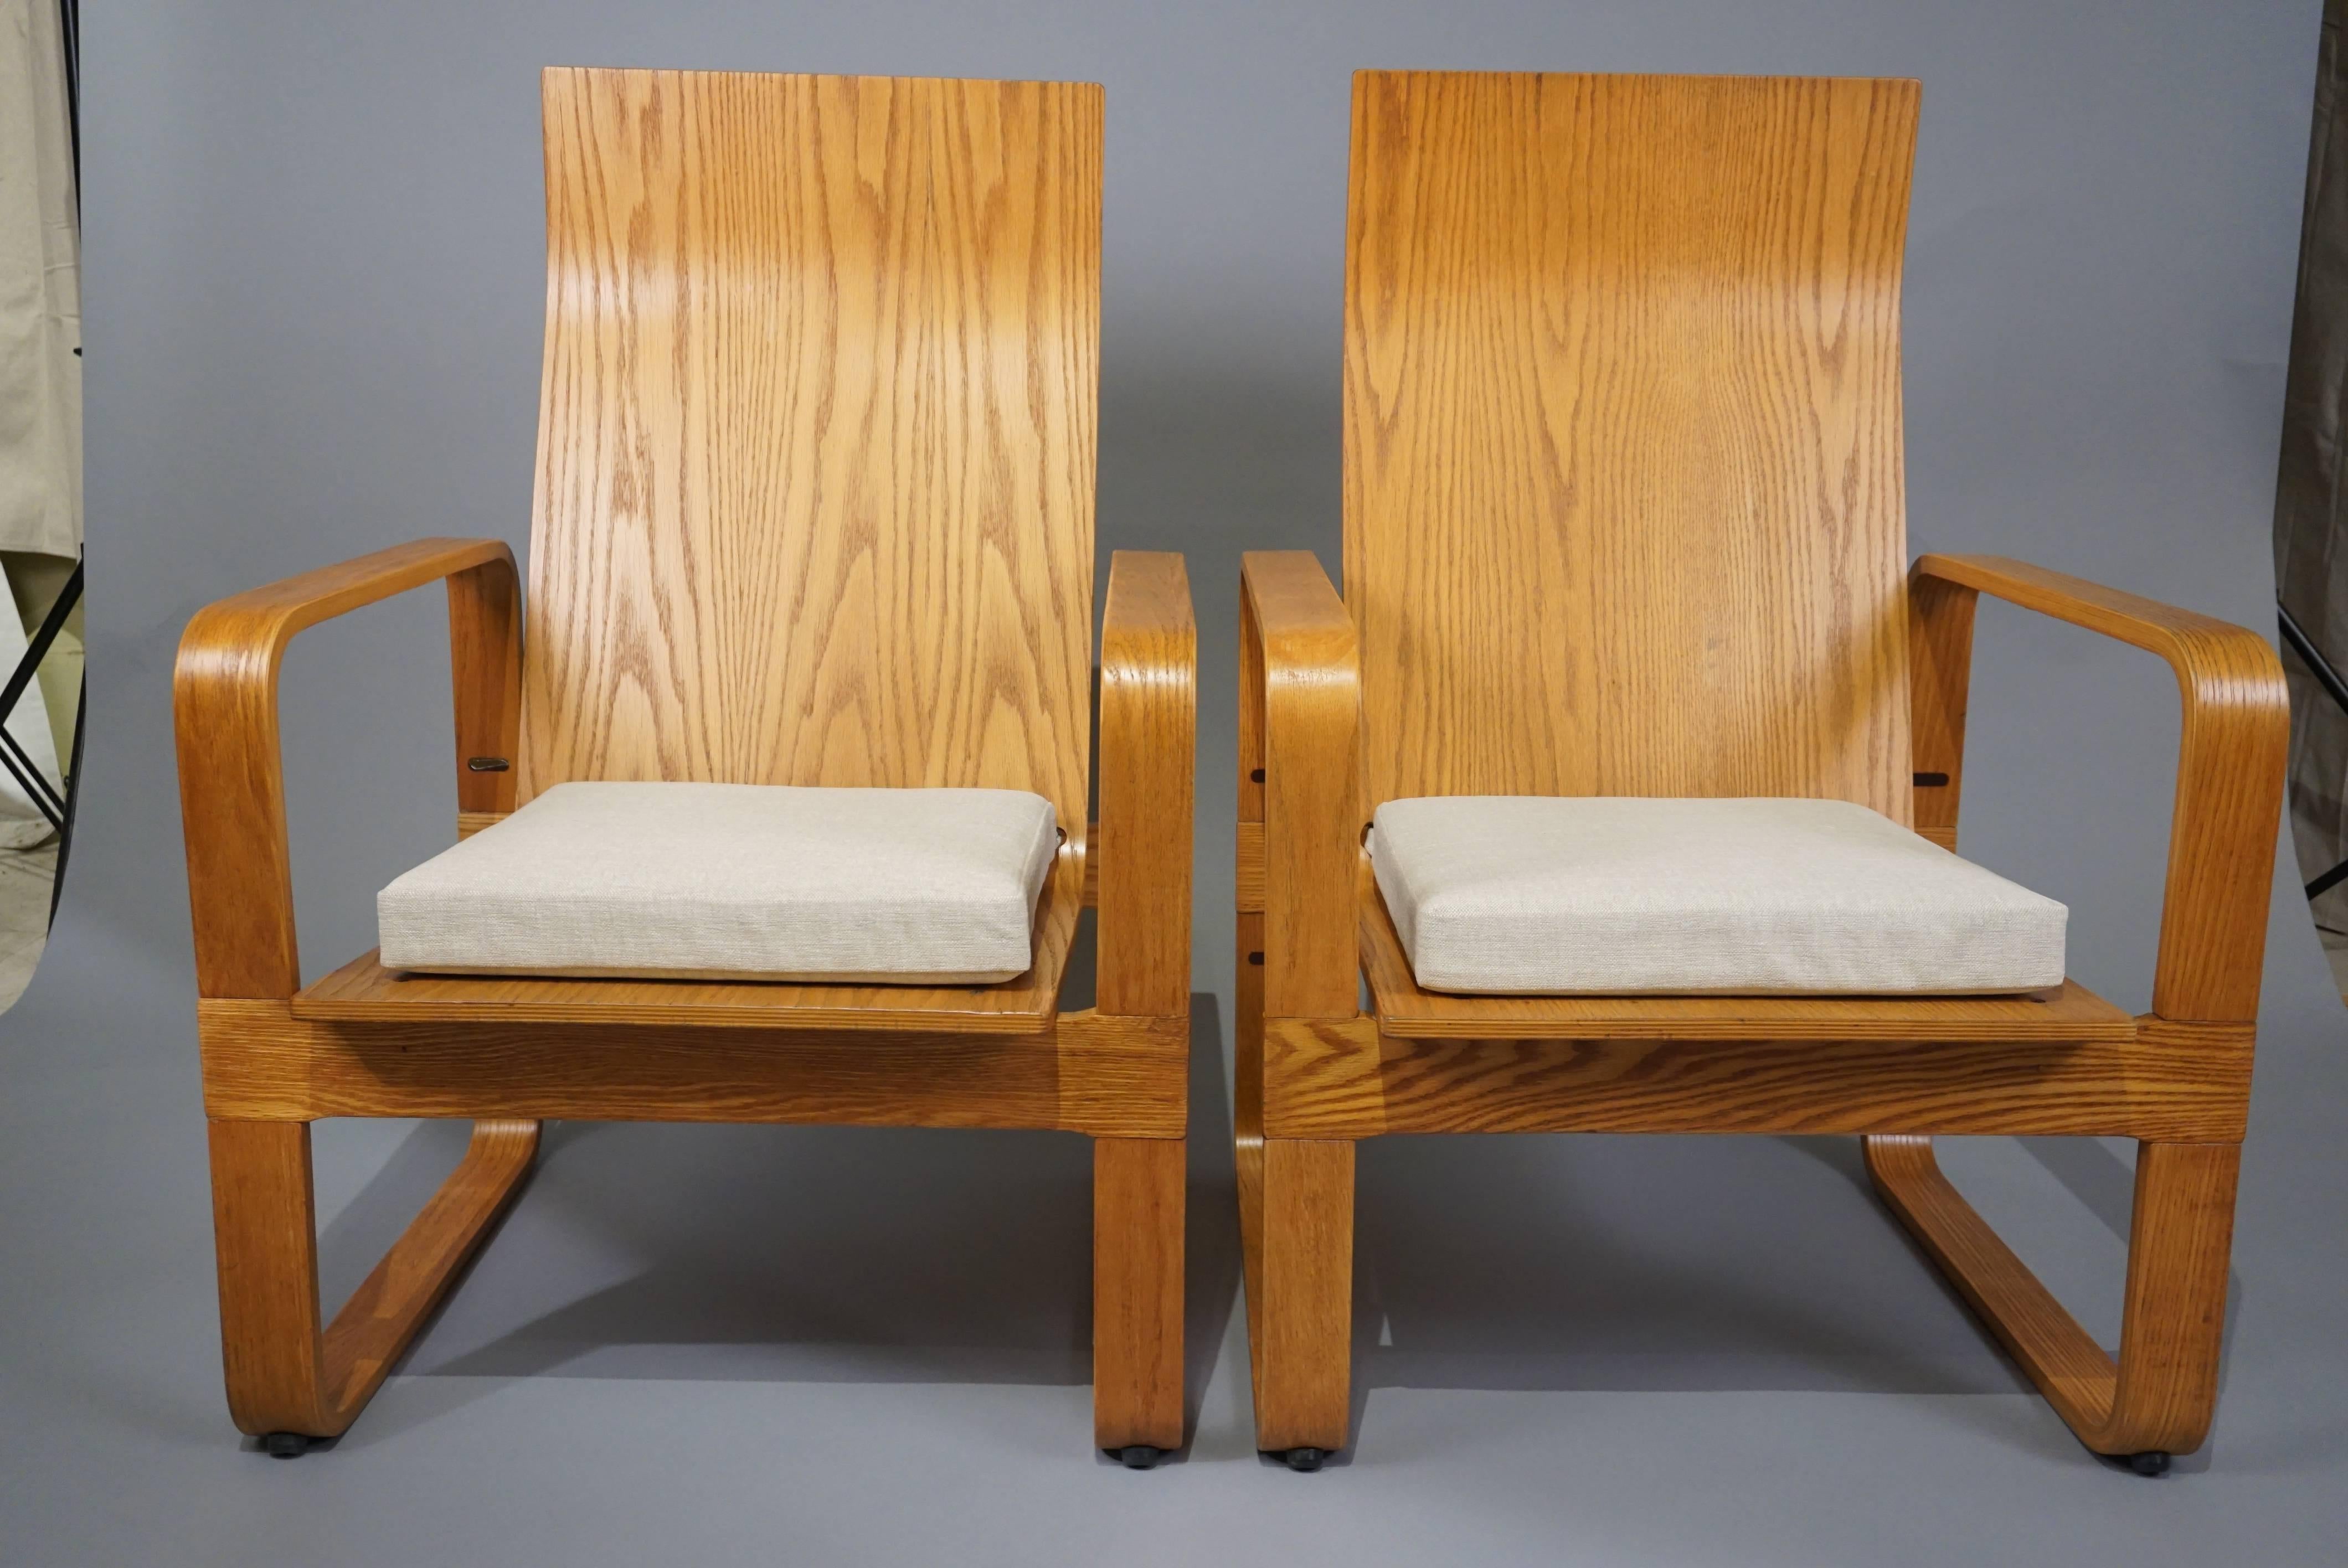 A 20th century pair of chairs created by the Thonet Company.
Bold profile with deep seat and comfortable cushion.